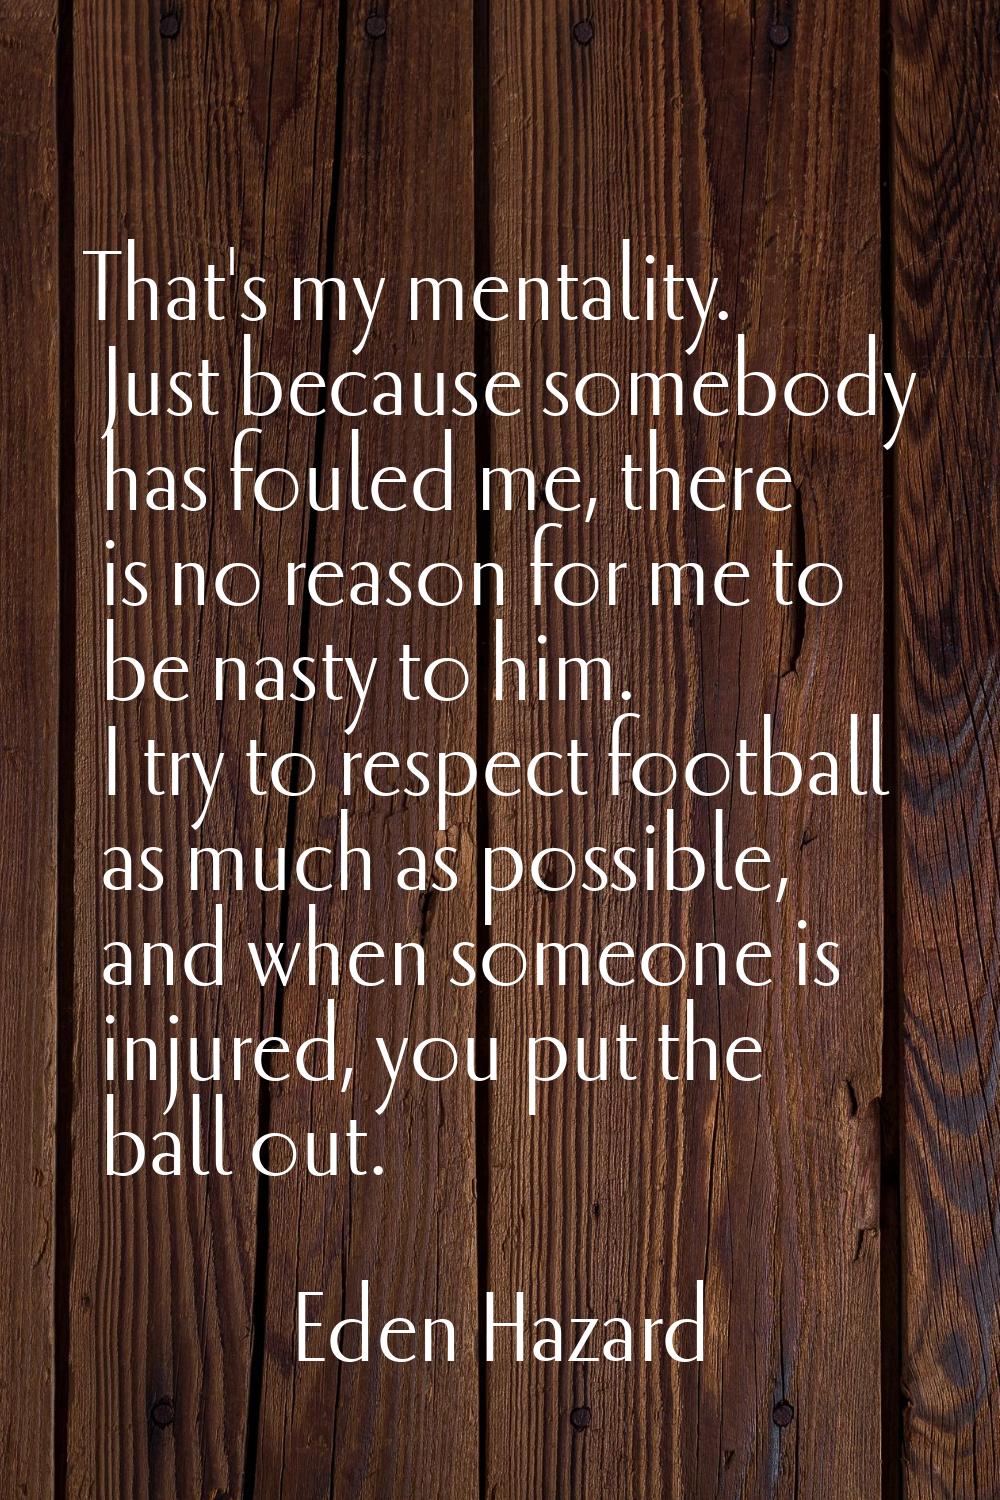 That's my mentality. Just because somebody has fouled me, there is no reason for me to be nasty to 